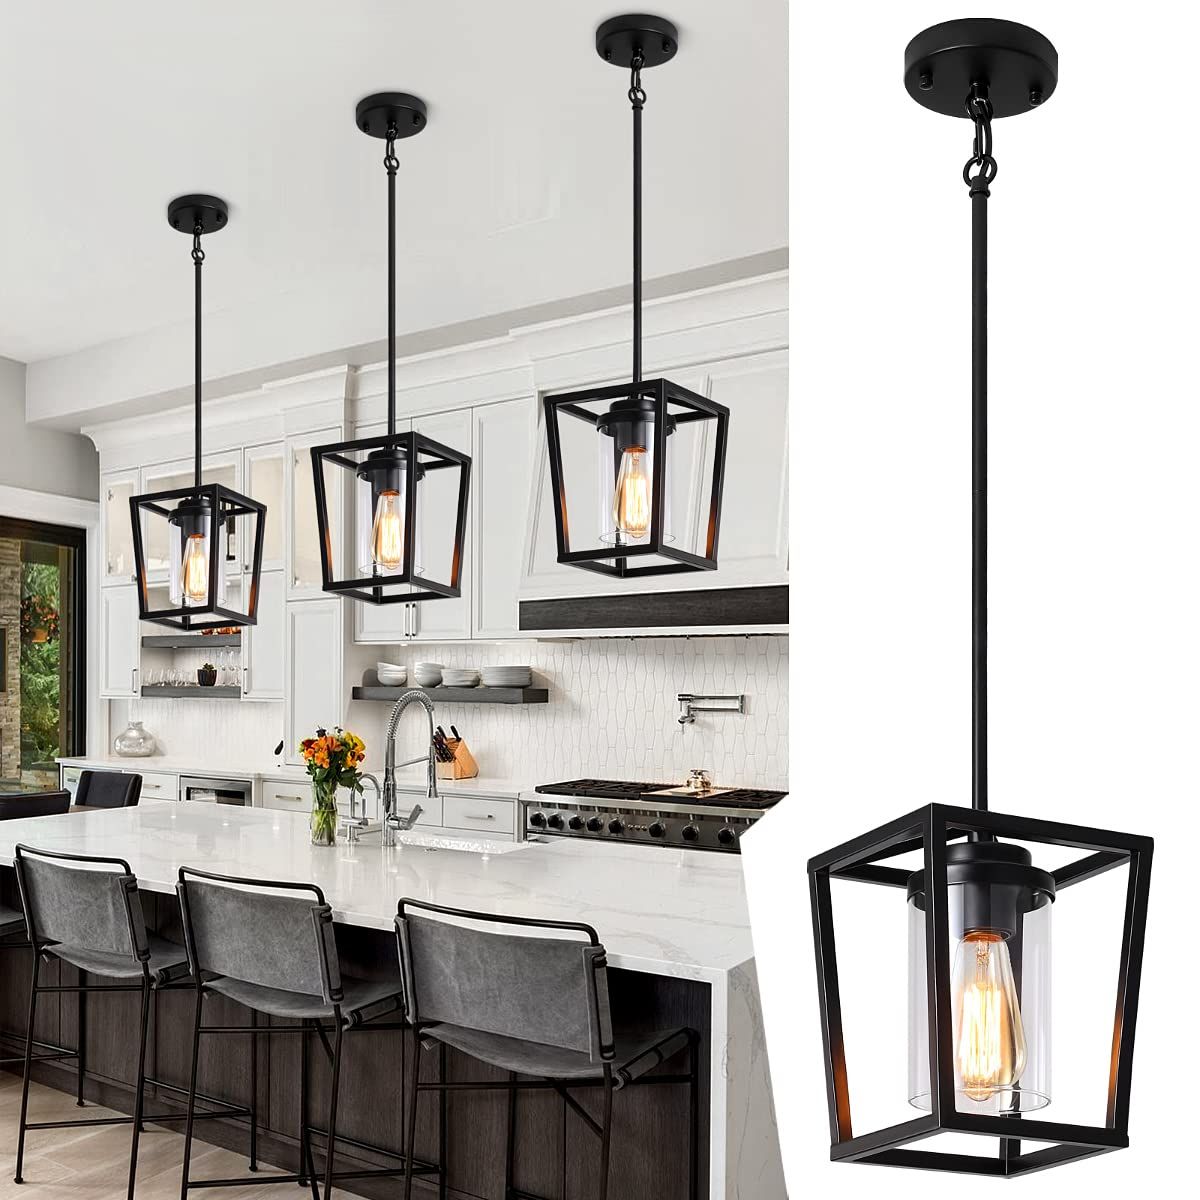 Widely Used Black Pendant Light For Kitchen Island, 1 Light Farmhouse Industrial Lantern  Pendant Light For Hallway Foyer Dinning Room With Clear Glass Shade,  Adjustable Height – – Amazon Within Transparent Glass Lantern Chandeliers (View 10 of 10)